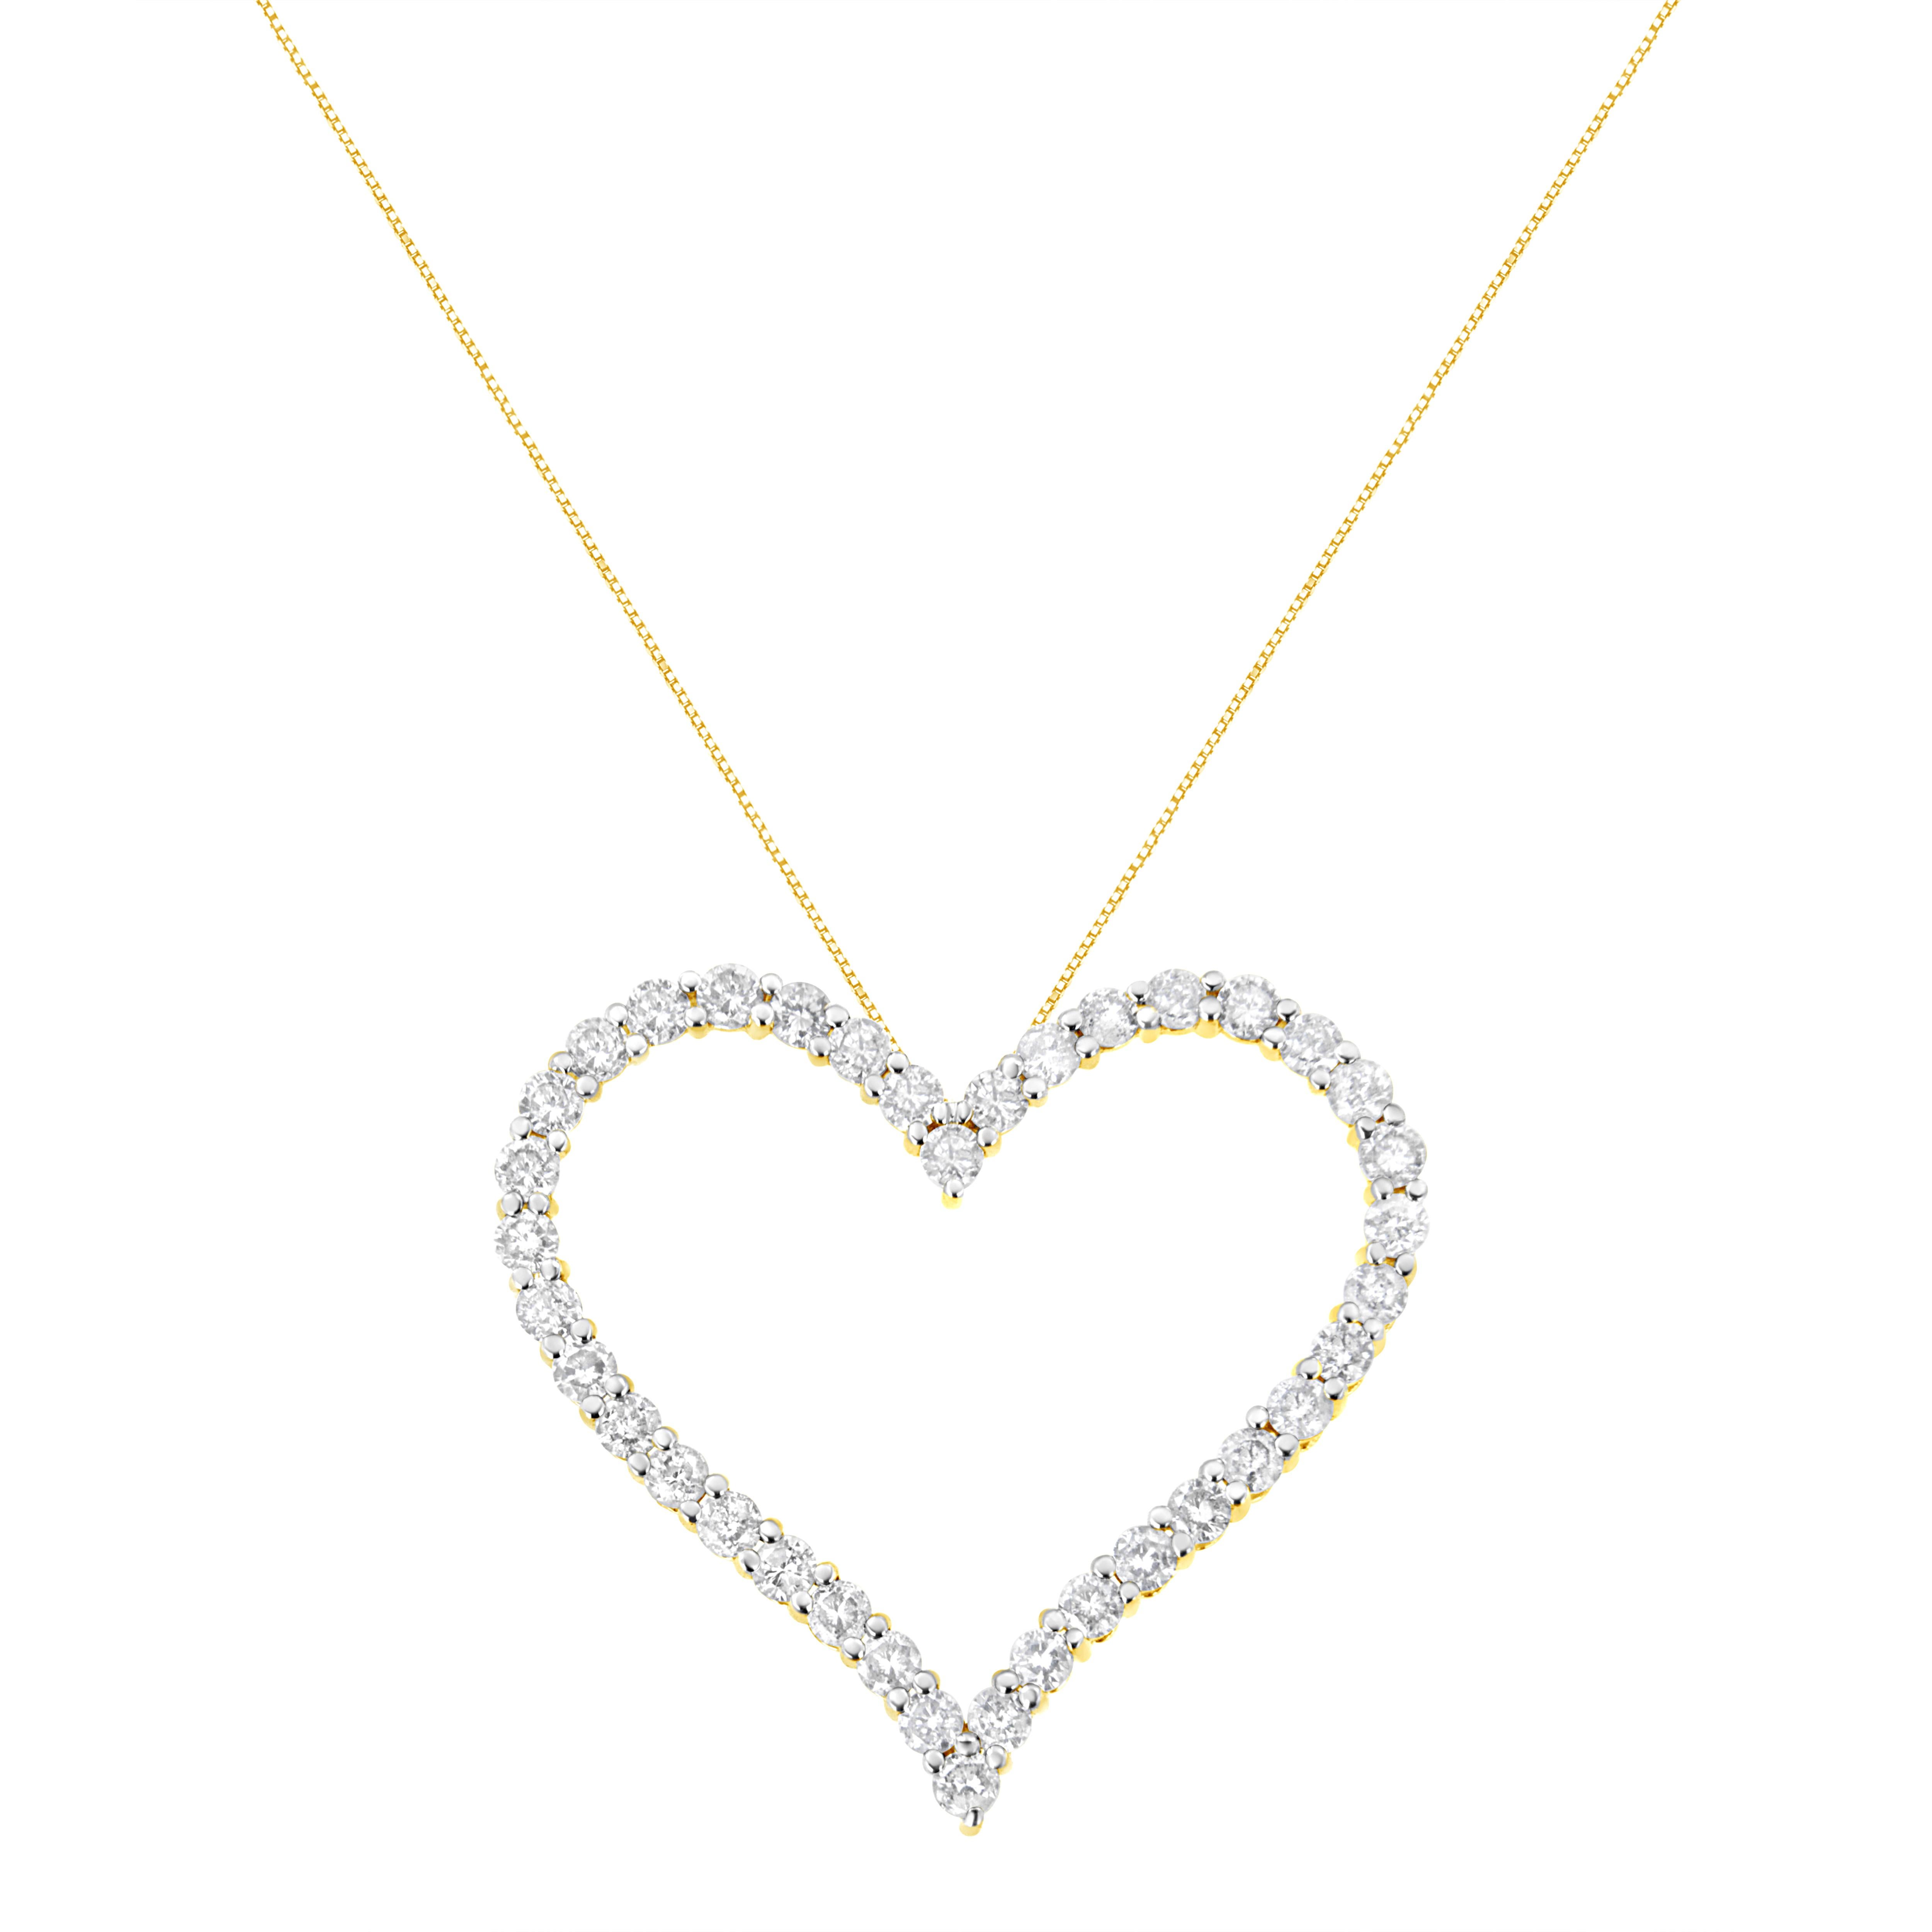 A single rows of natural, sparkling diamonds are set in warm 10kt gold plated .925 sterling silver gold to create a stunning open heart design in this beautiful pendant necklace for her. This pendant has 38 round diamonds, that are I1-I2 in clarity